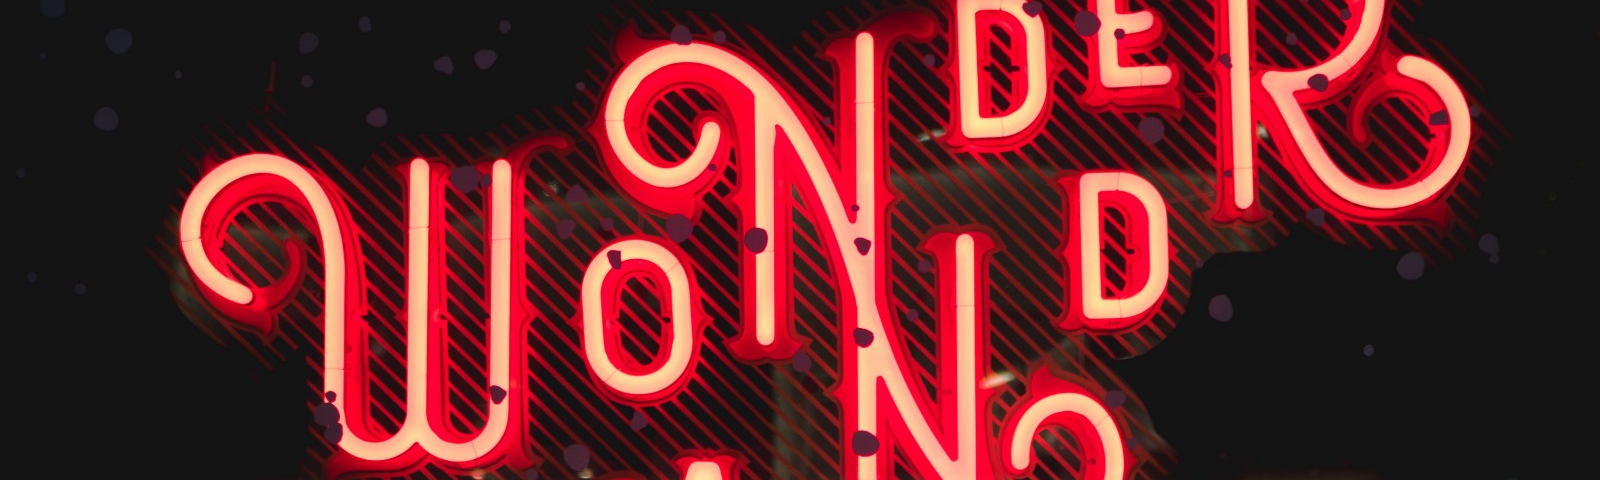 Red neon on Wonder Land in curly art deco text. With a large M in front added by Zane Dickens